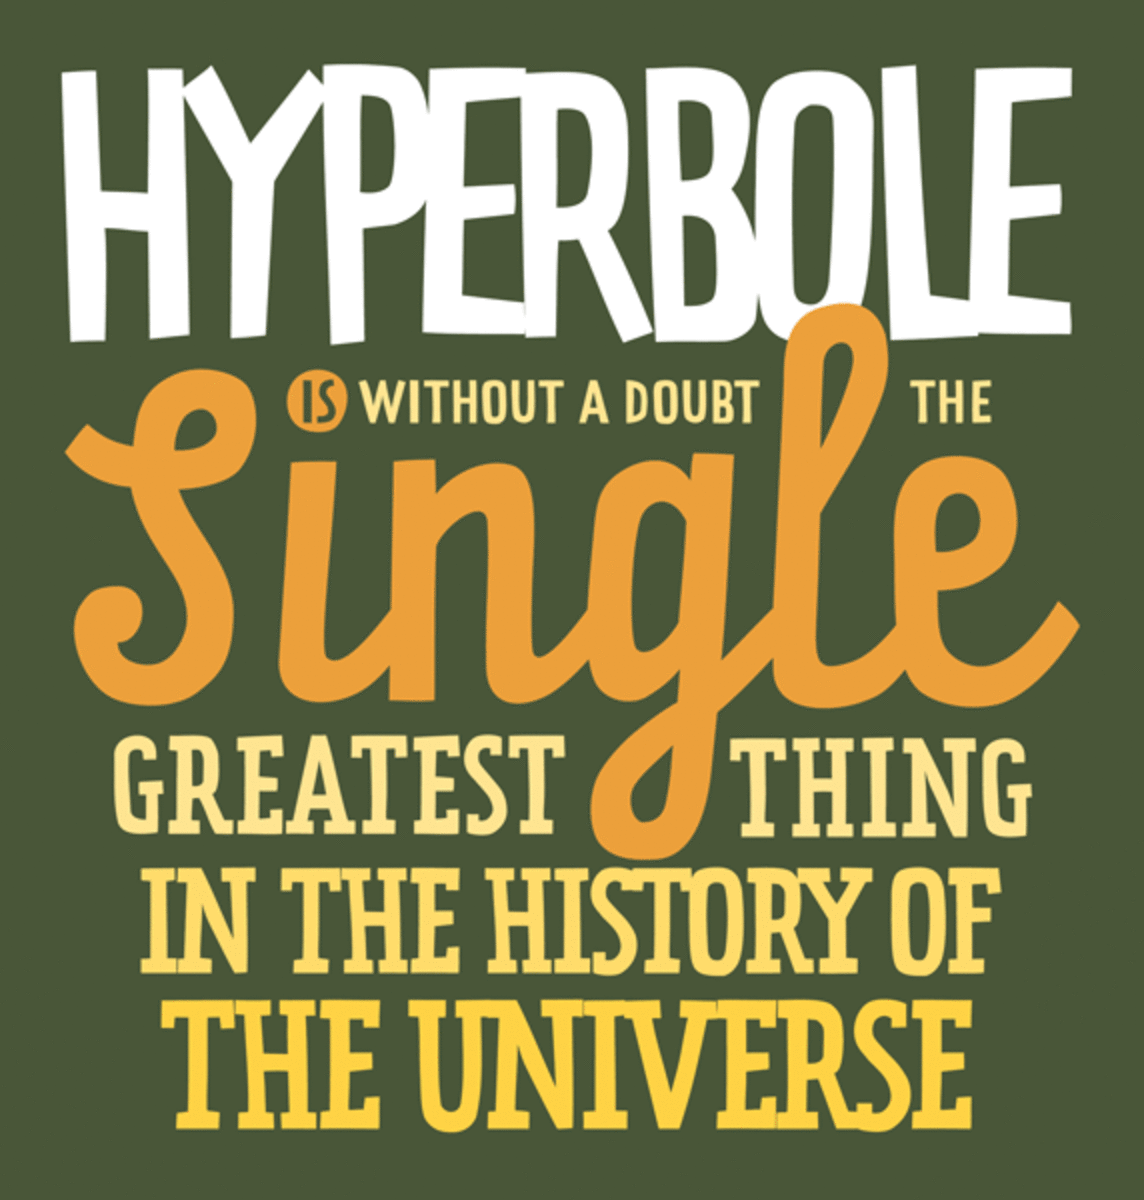 This image ironically uses hyperbole to express how incredible hyperbole is.